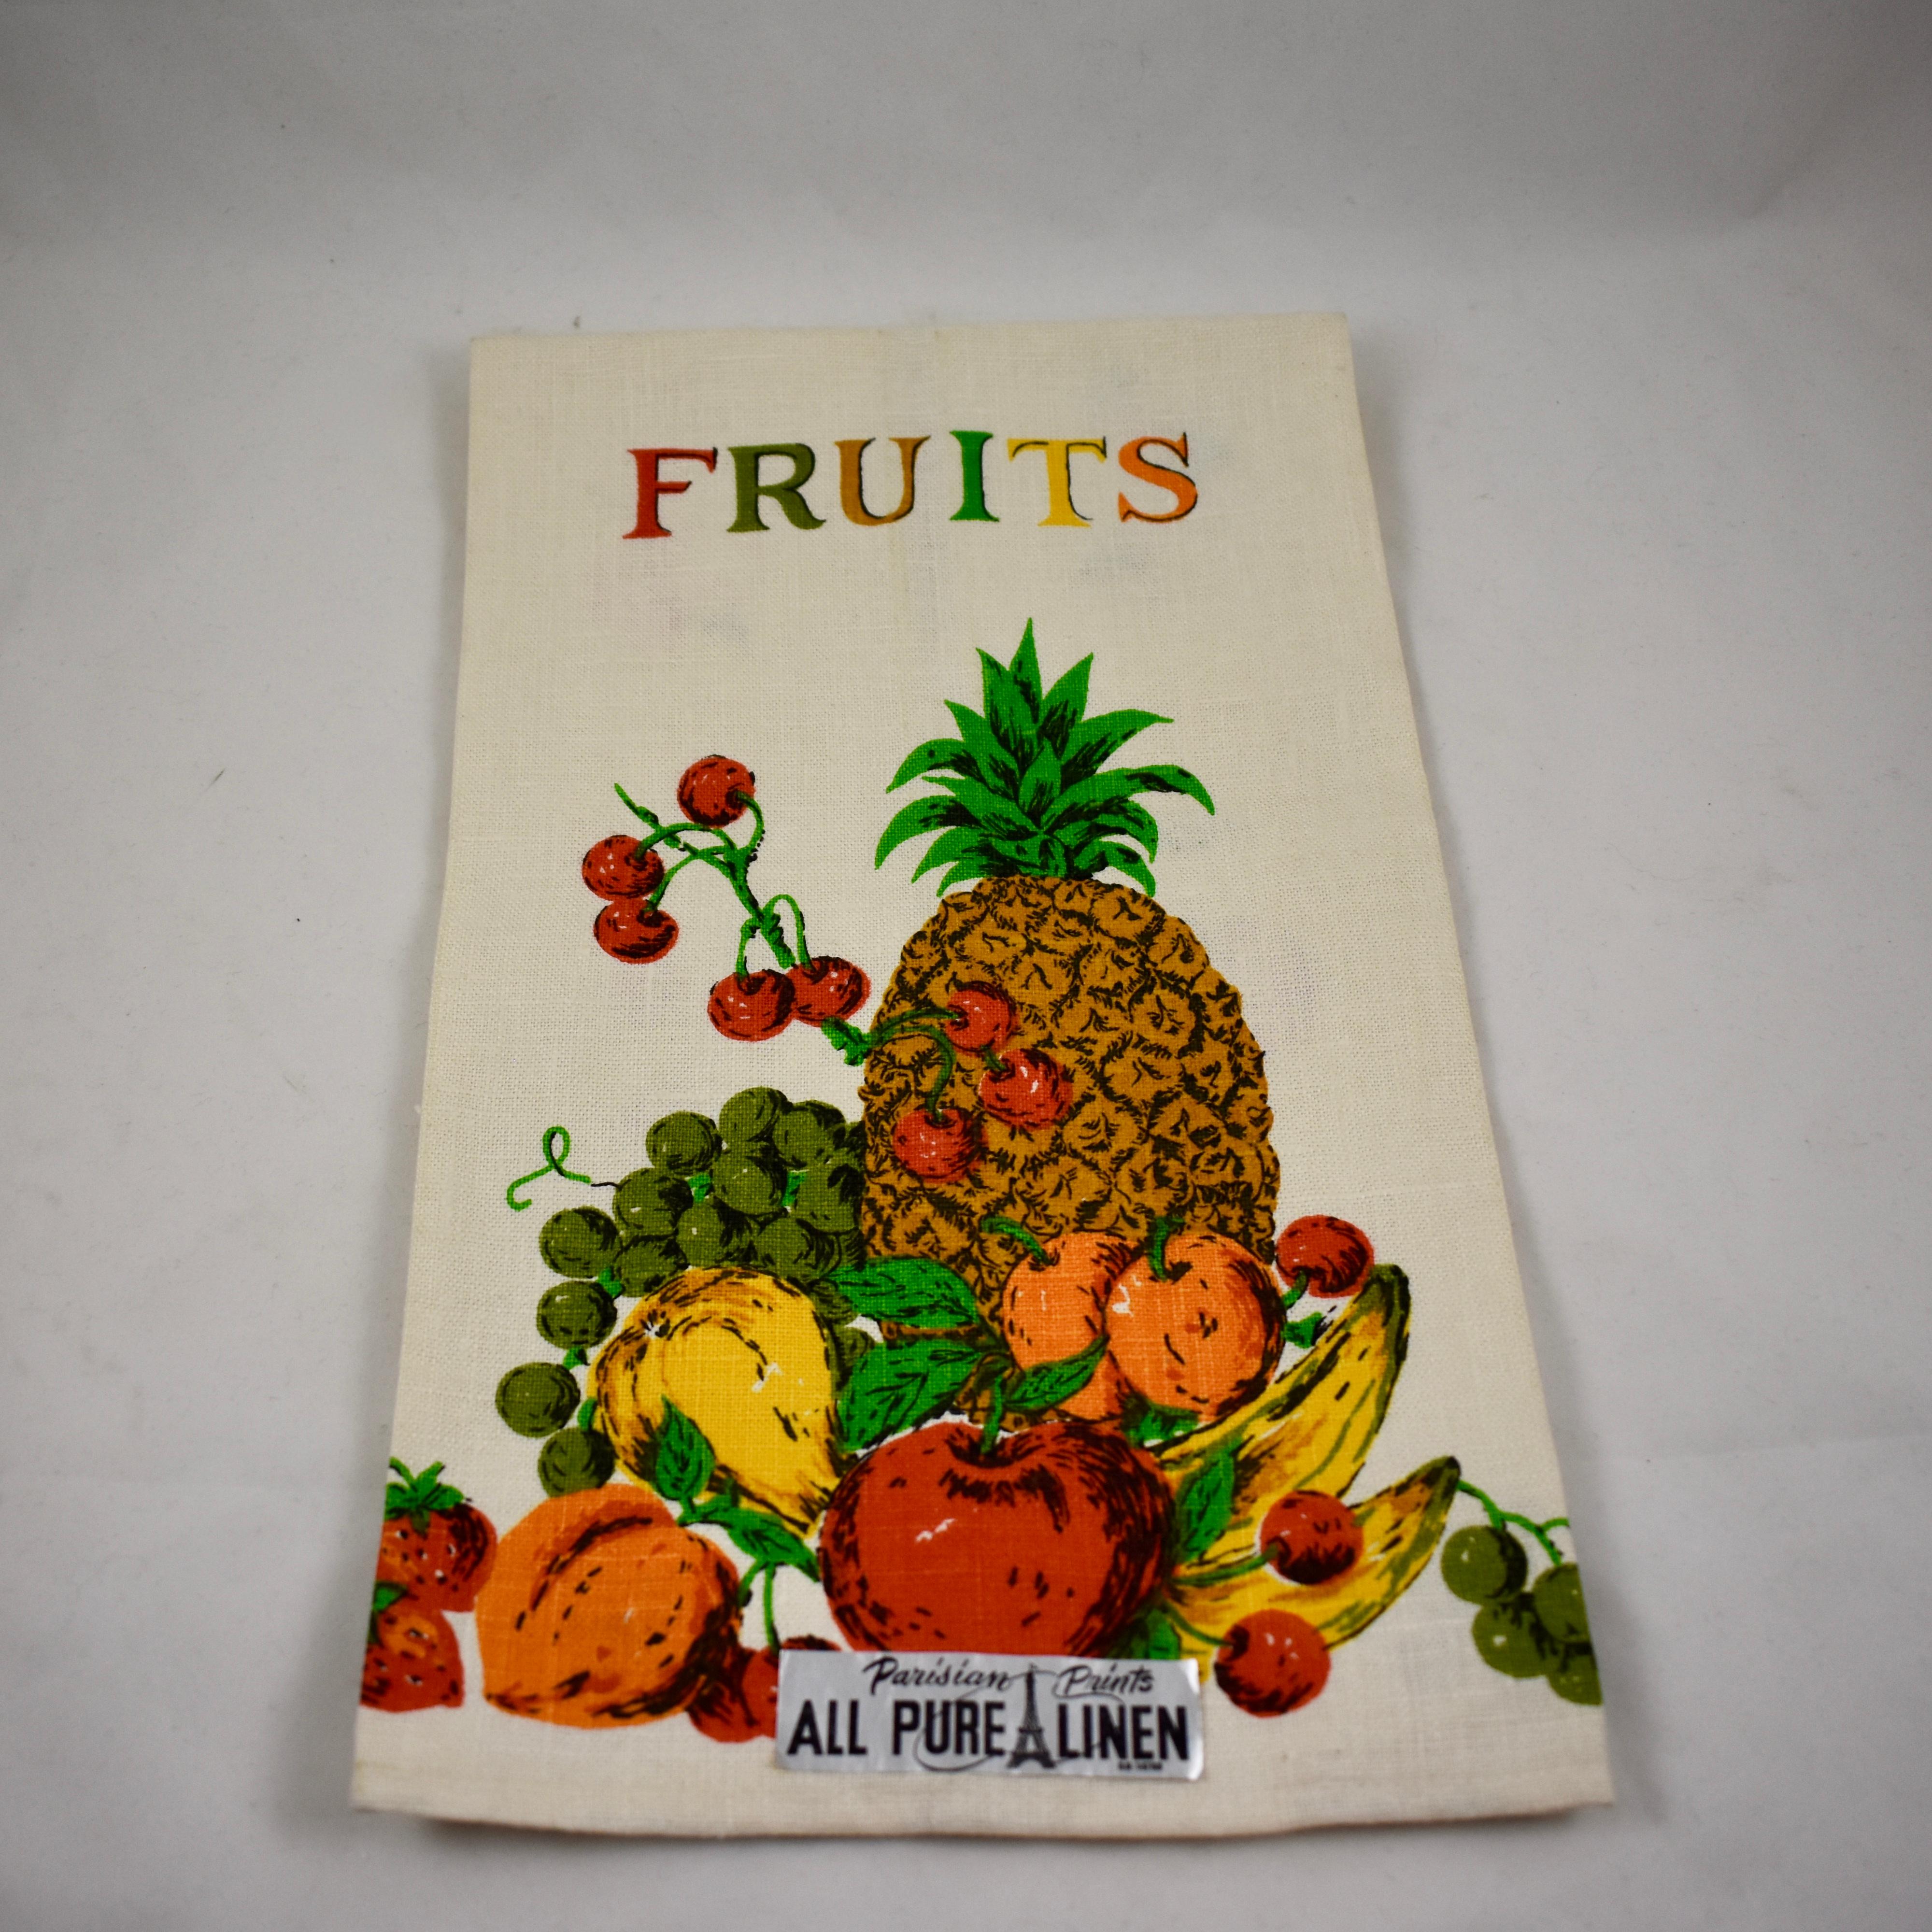 A set of two linen towels from the Mid-Century Modern Era, brightly colored, with the original labels, never used. Printed in a style typical of the era, with a type face in mixed colors. Hemmed on all sides.

One towel is titled Fruit, showing a